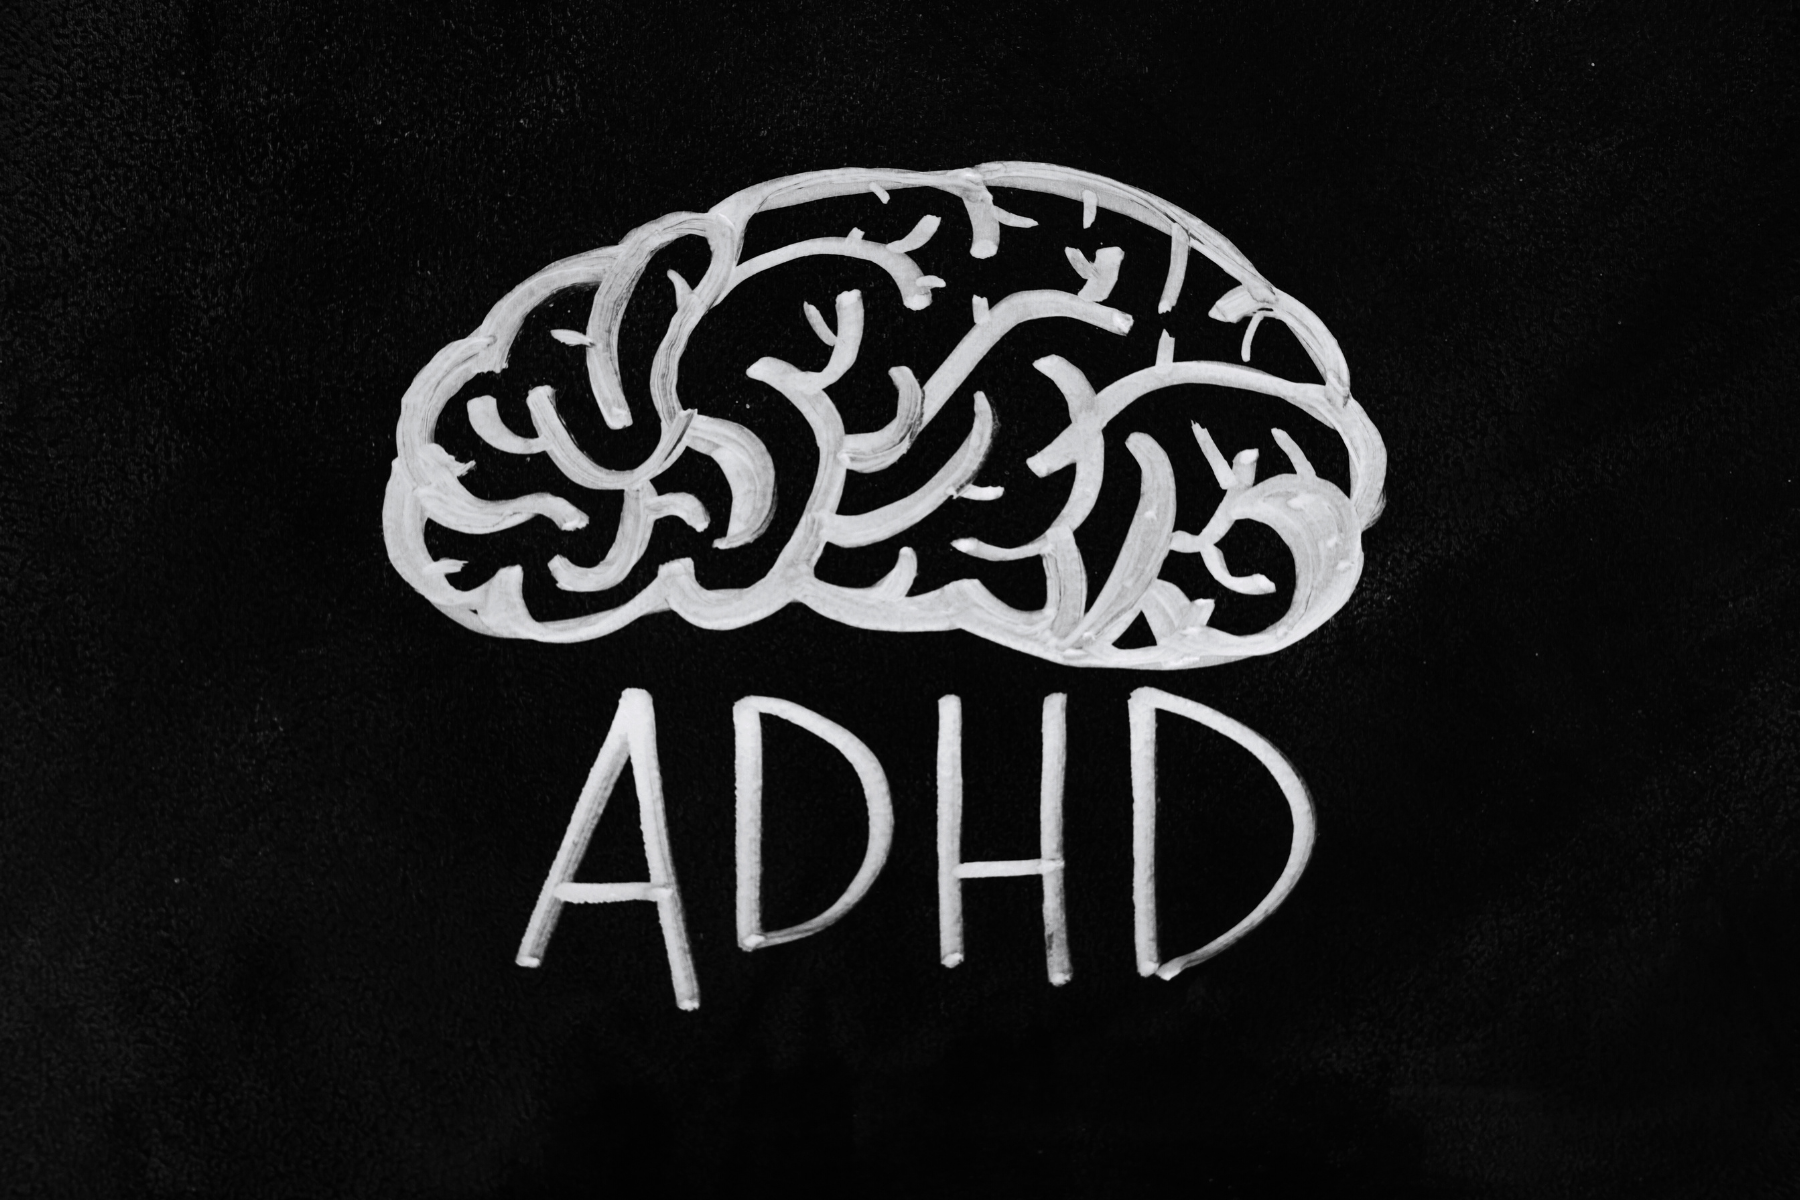 Even though October is over, it is still important to bring awareness to ADHD.